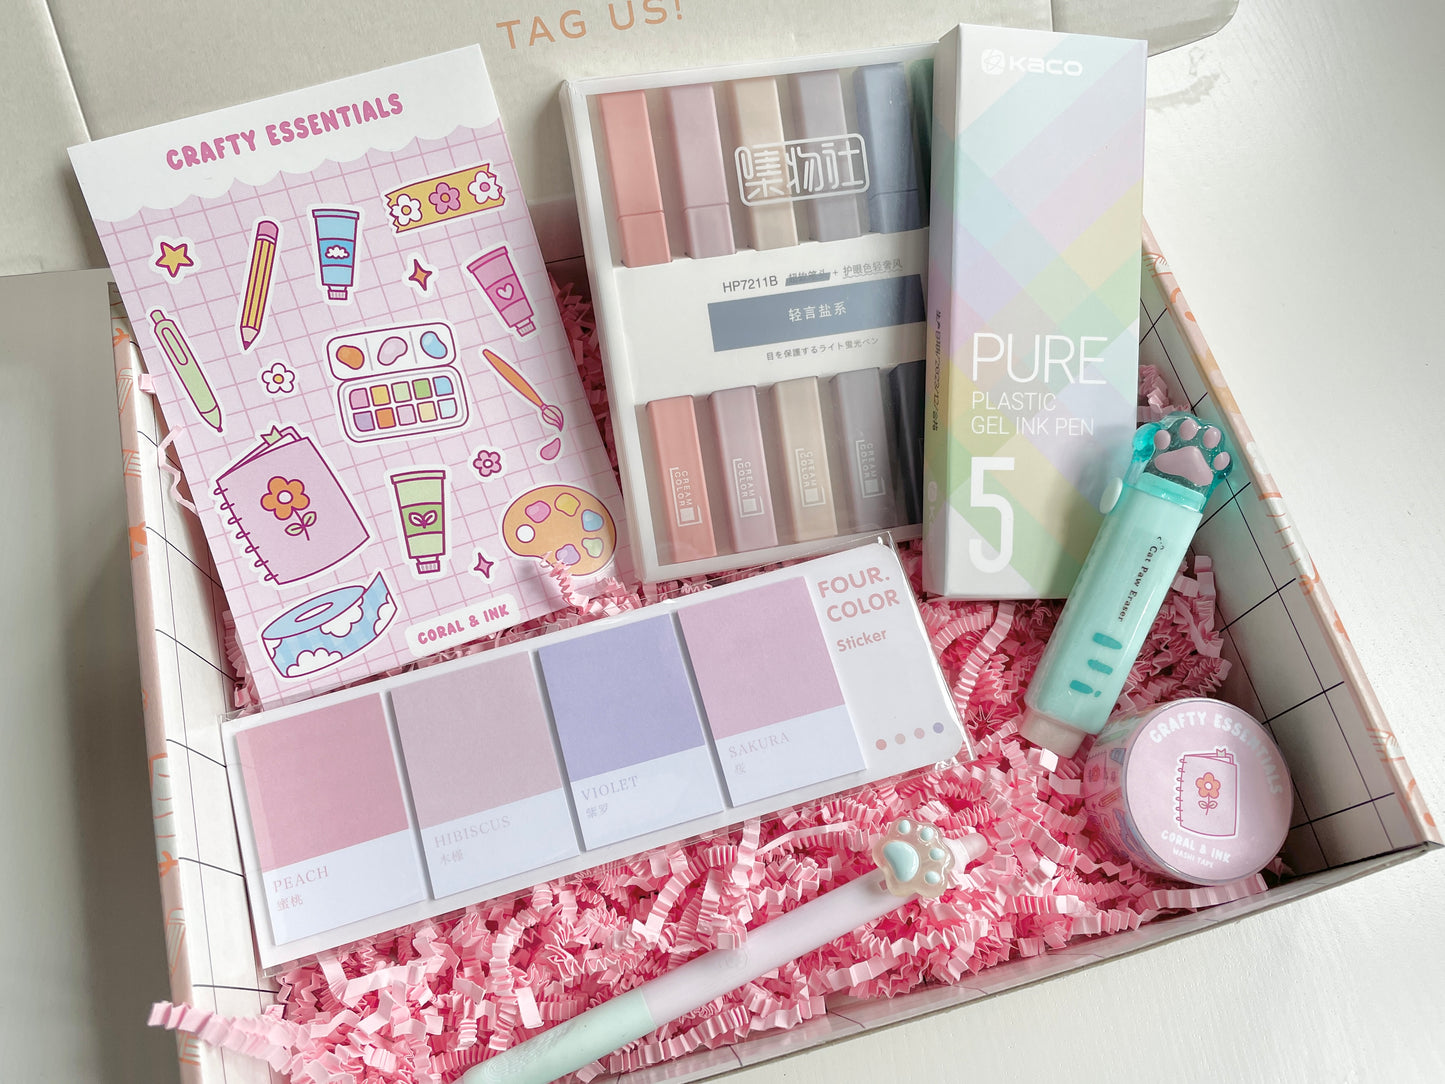 Coral's Favourites Stationery Box